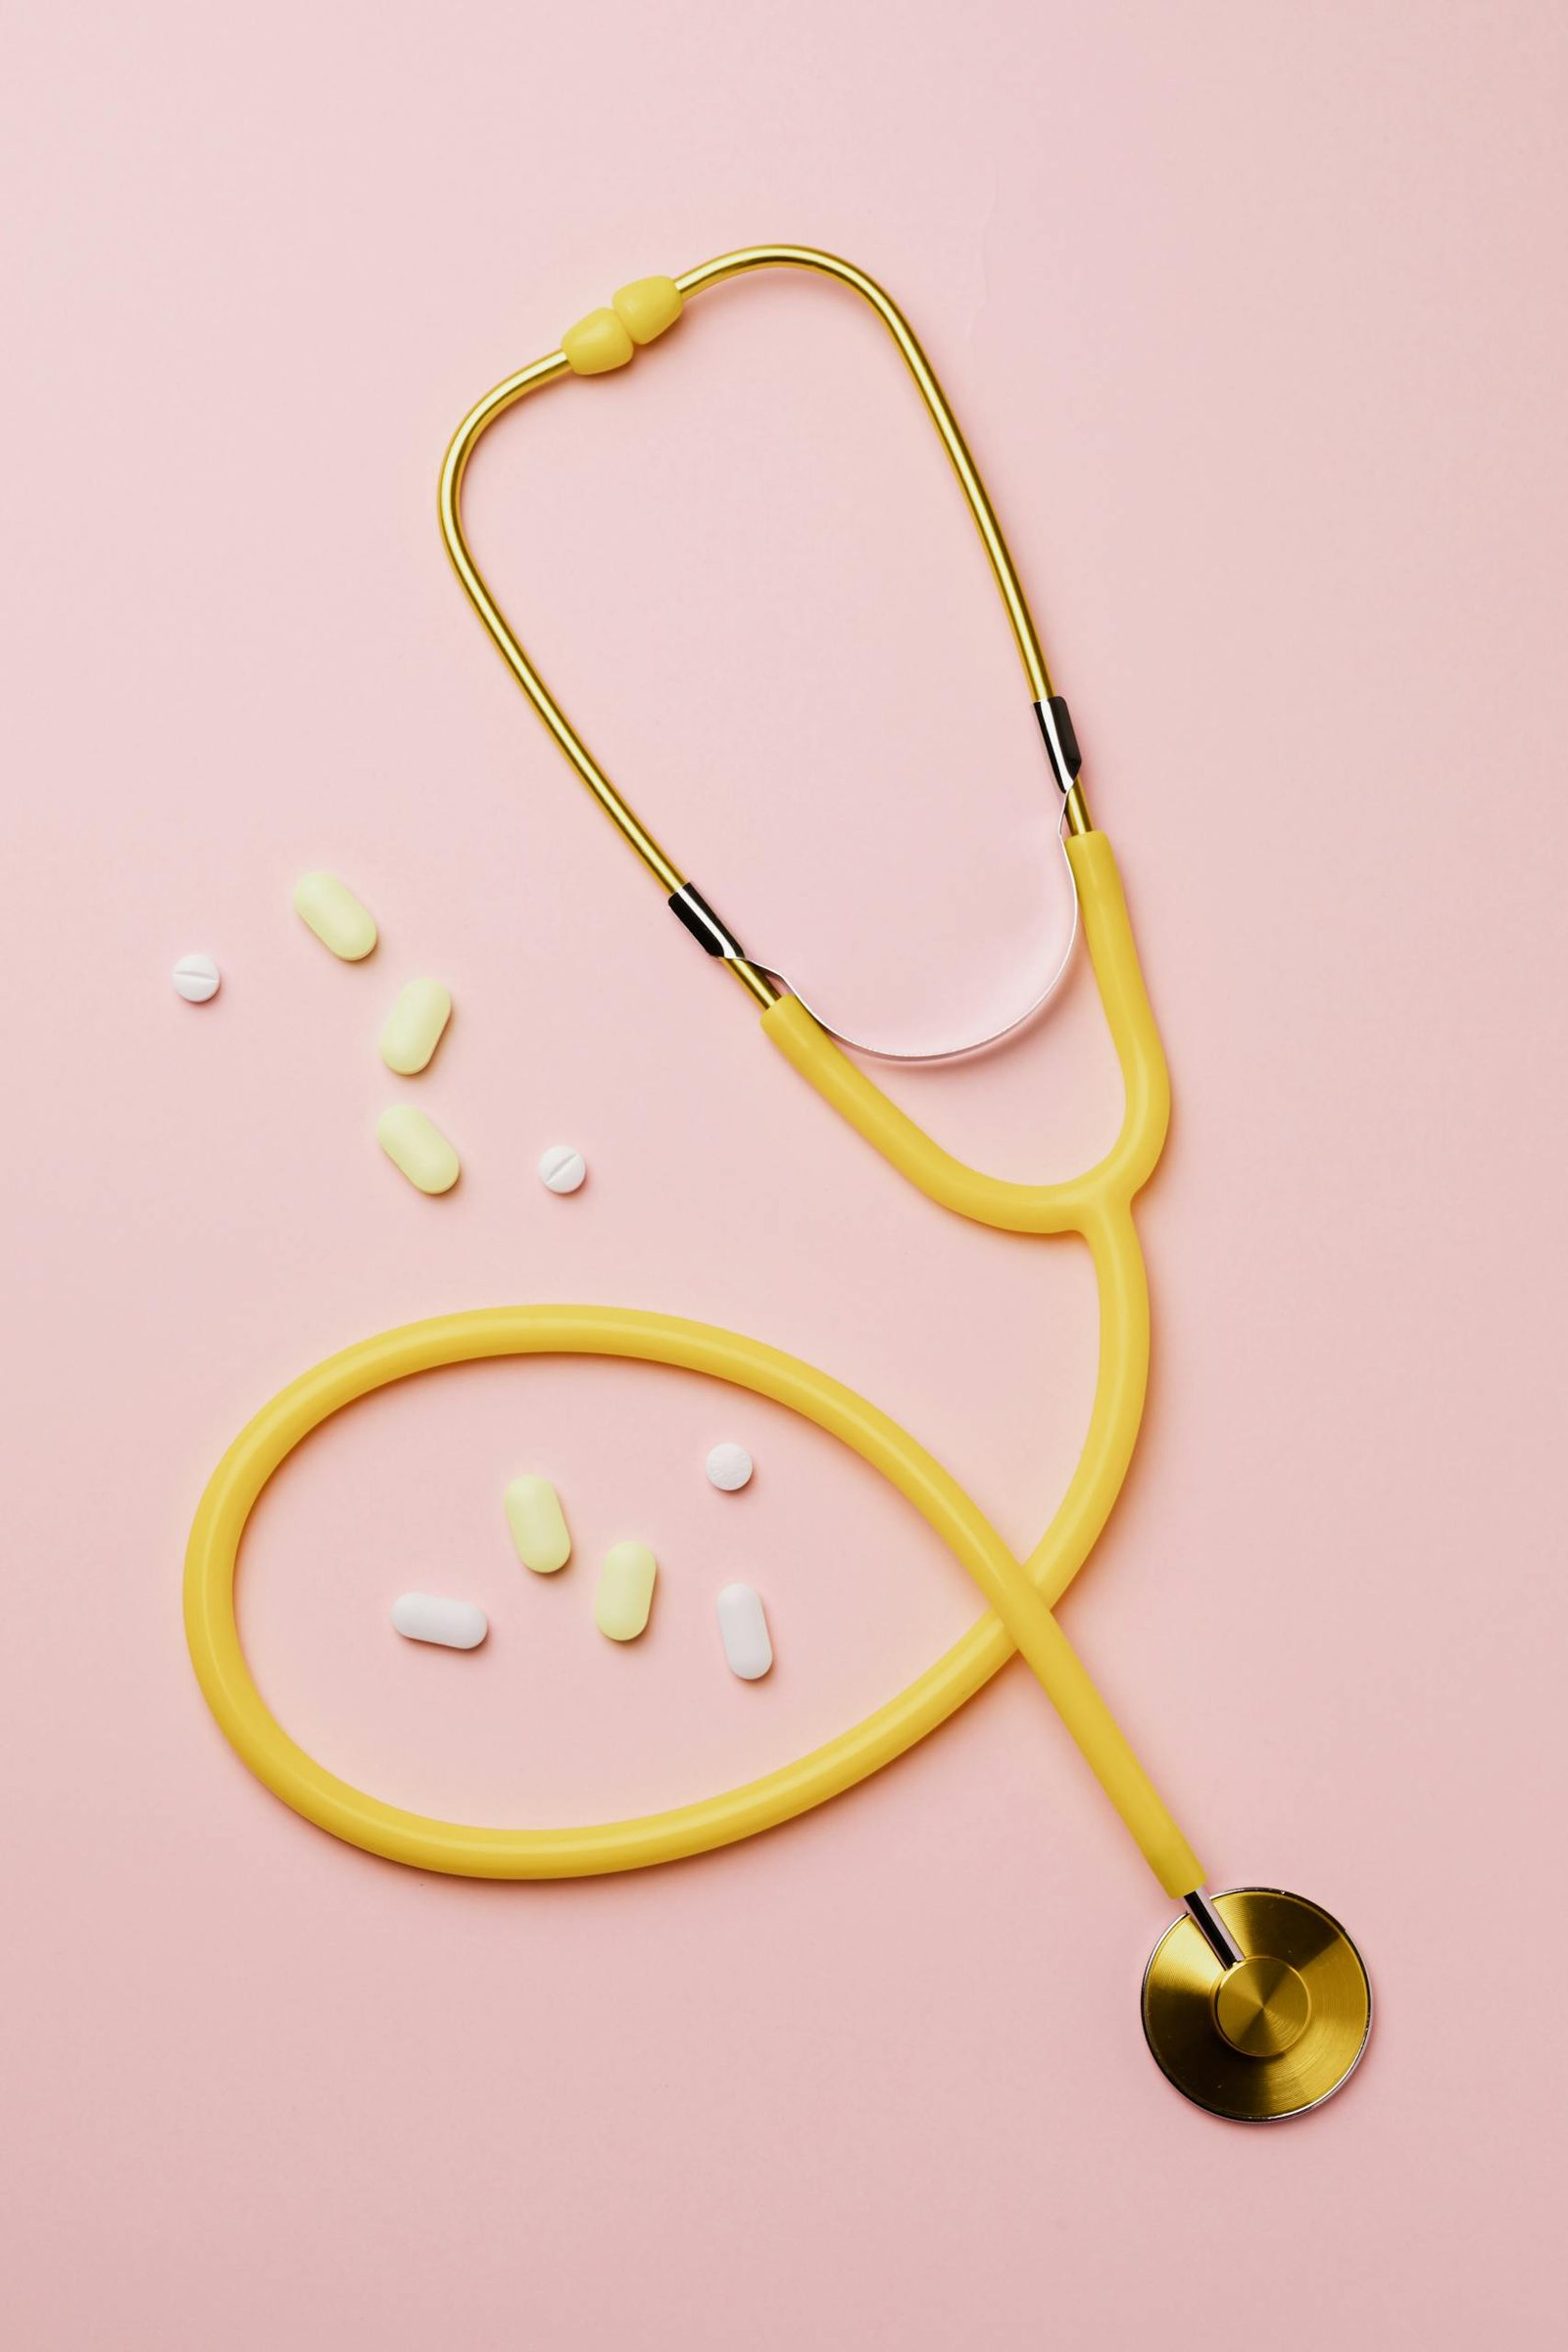 Yellow Stethoscope And Medicines On Pink Background